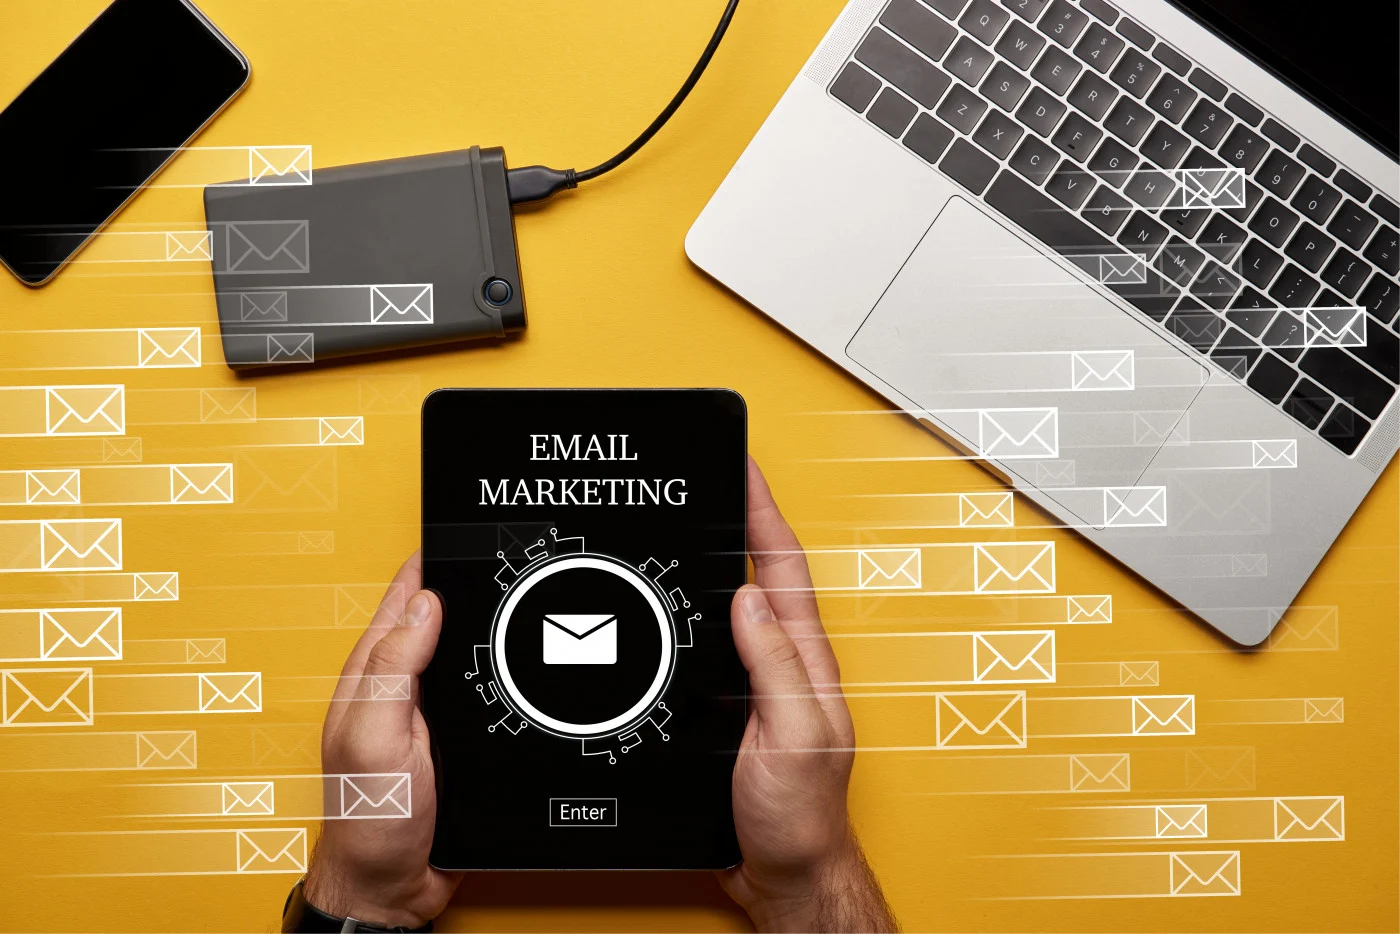 How Business Coaches Can Use Email Marketing for Lead Generation